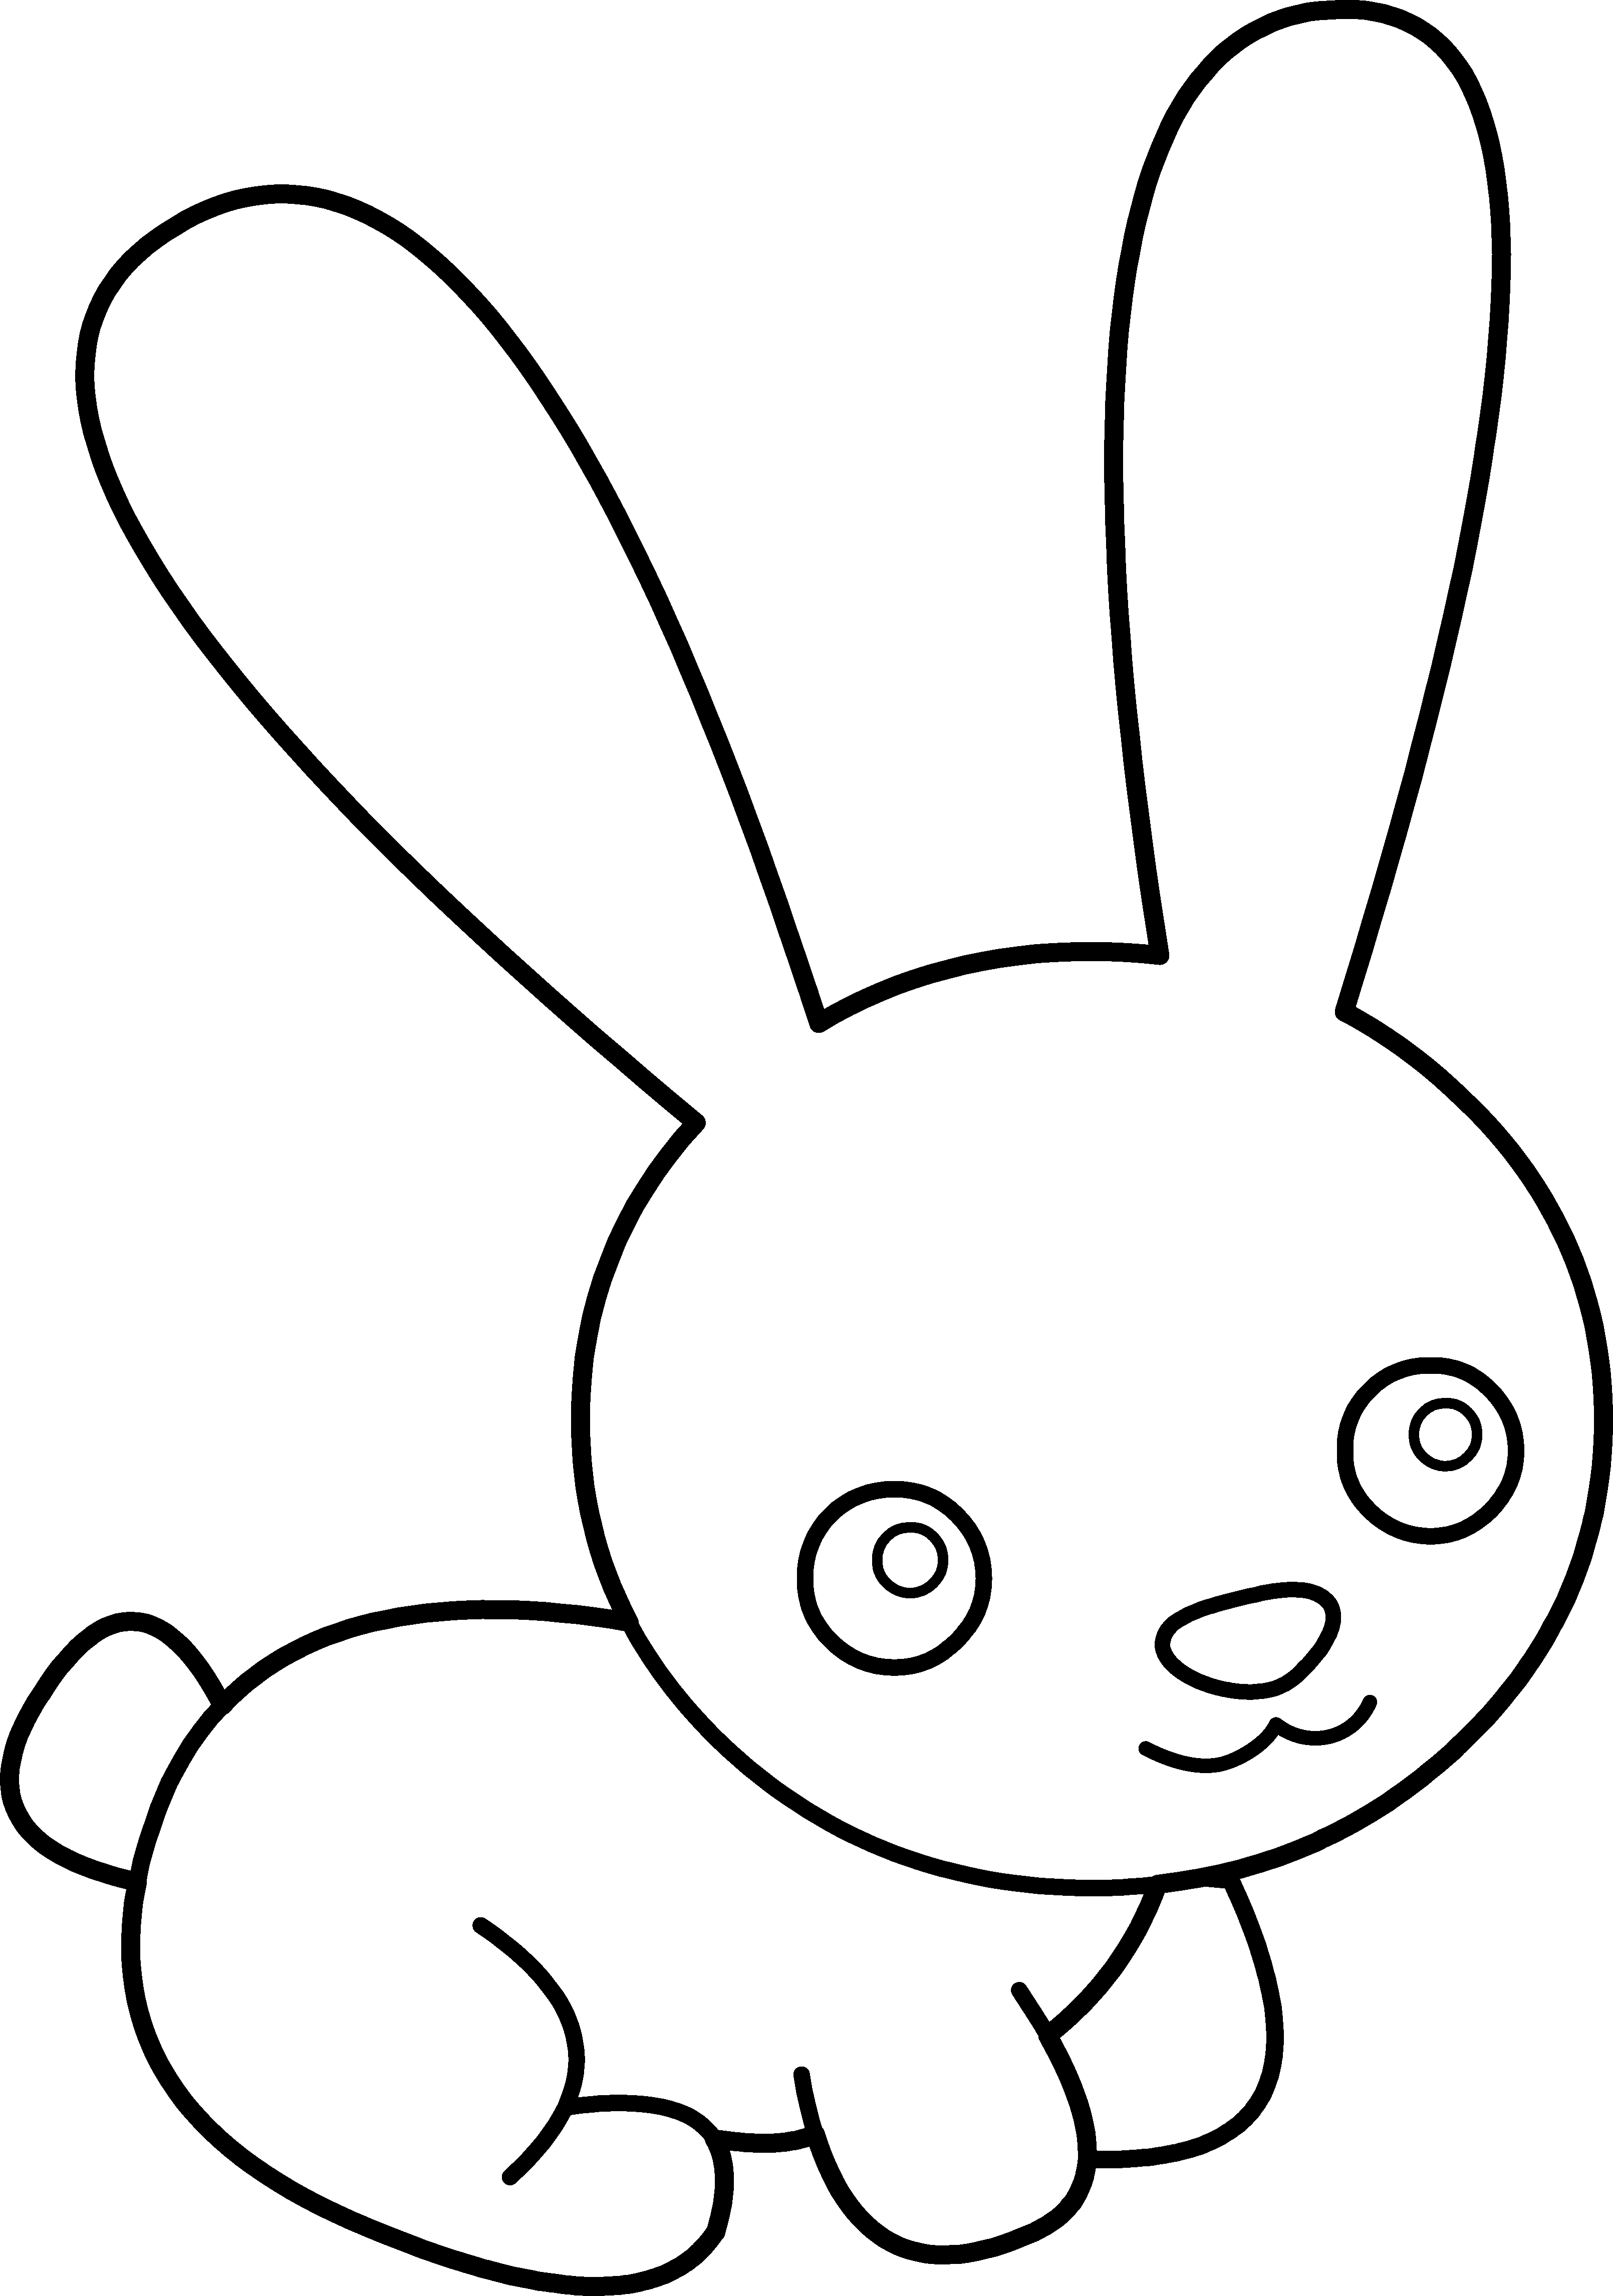 Black And White Bunnies Clip Art Images & Pictures - Becuo